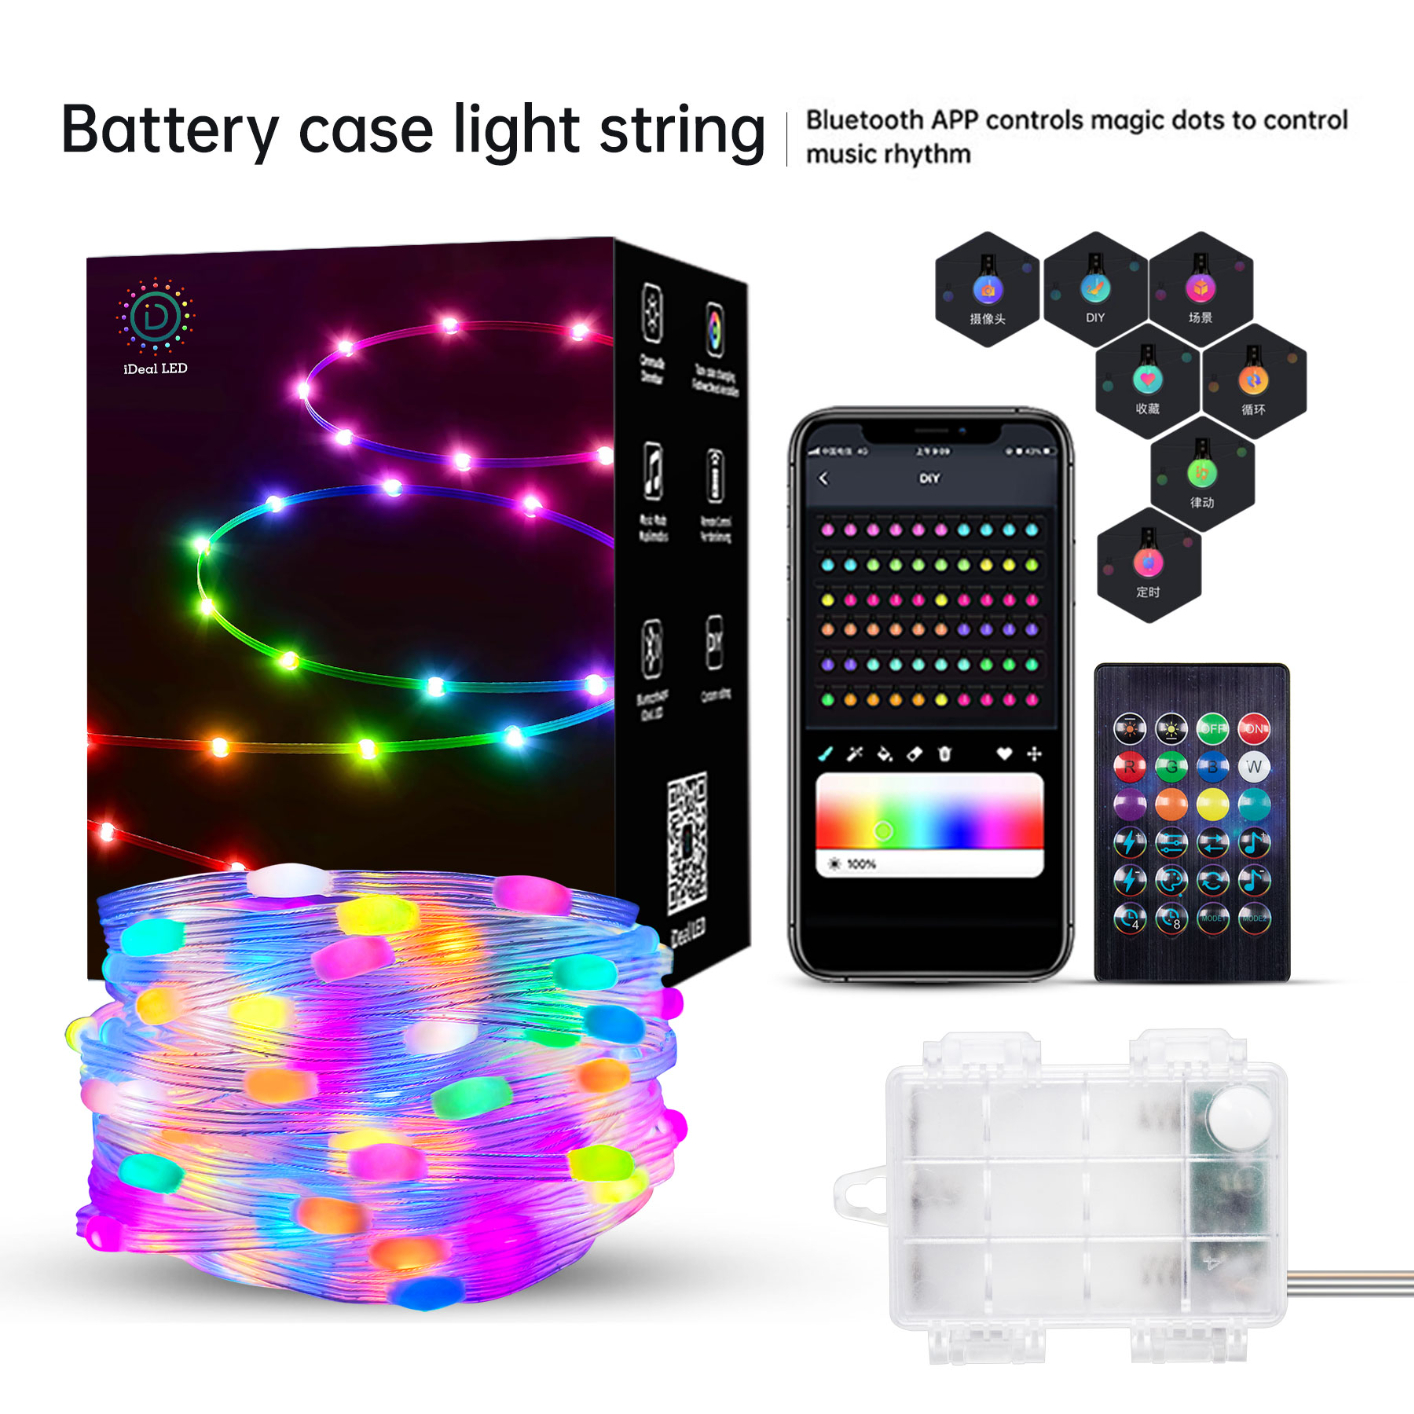 AUNONT APP battery box light string LED magic dot control leather wire light Christmas holiday decoration outdoor camping atmosphere light